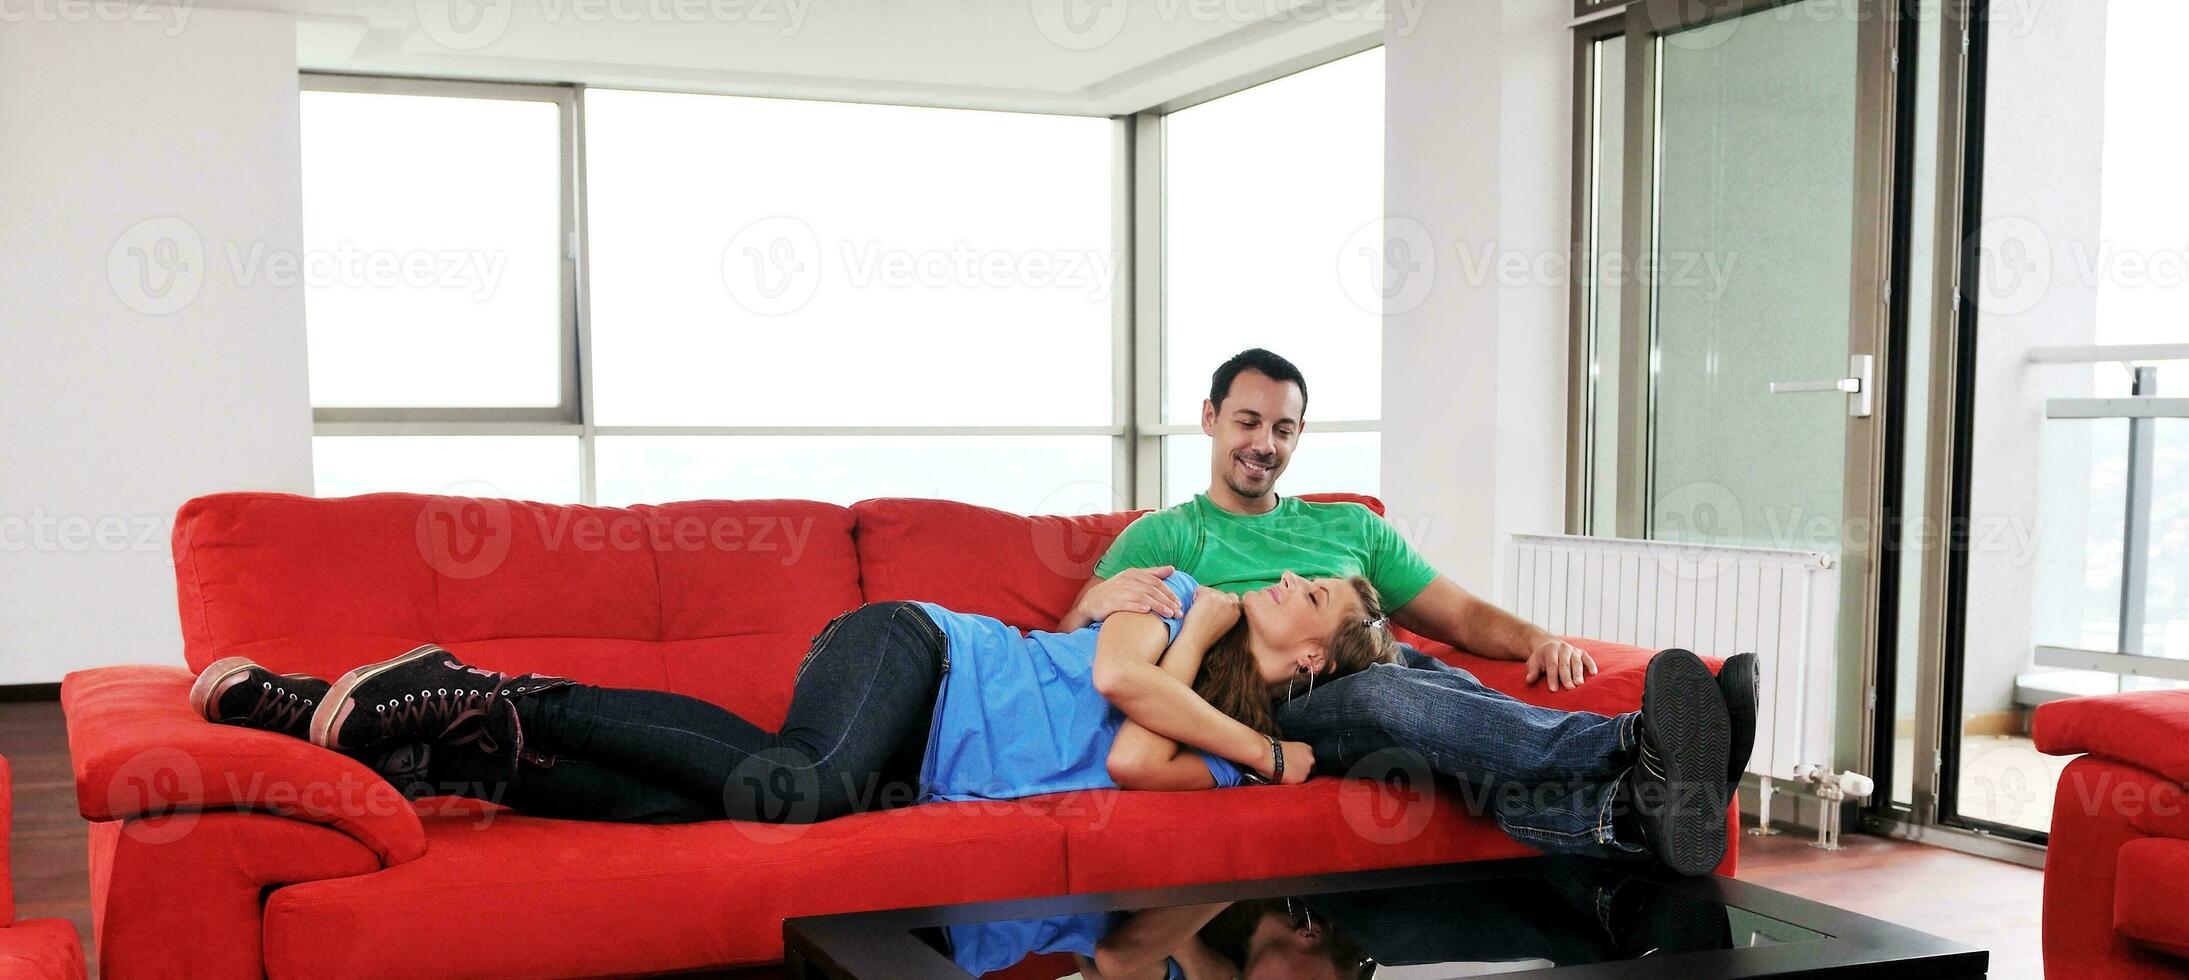 happy couple relax on red sofa photo